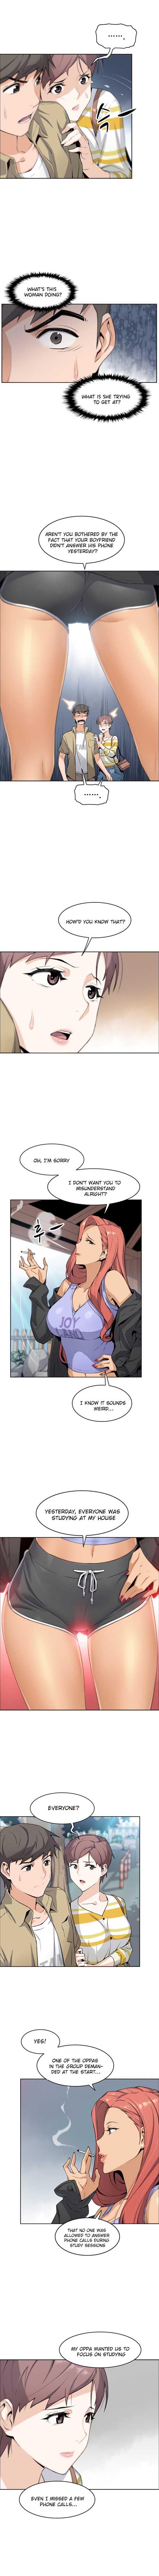 Housekeeper [Neck Pillow, Paper] Ch.49/49 [English] [Manhwa PDF] Completed 27